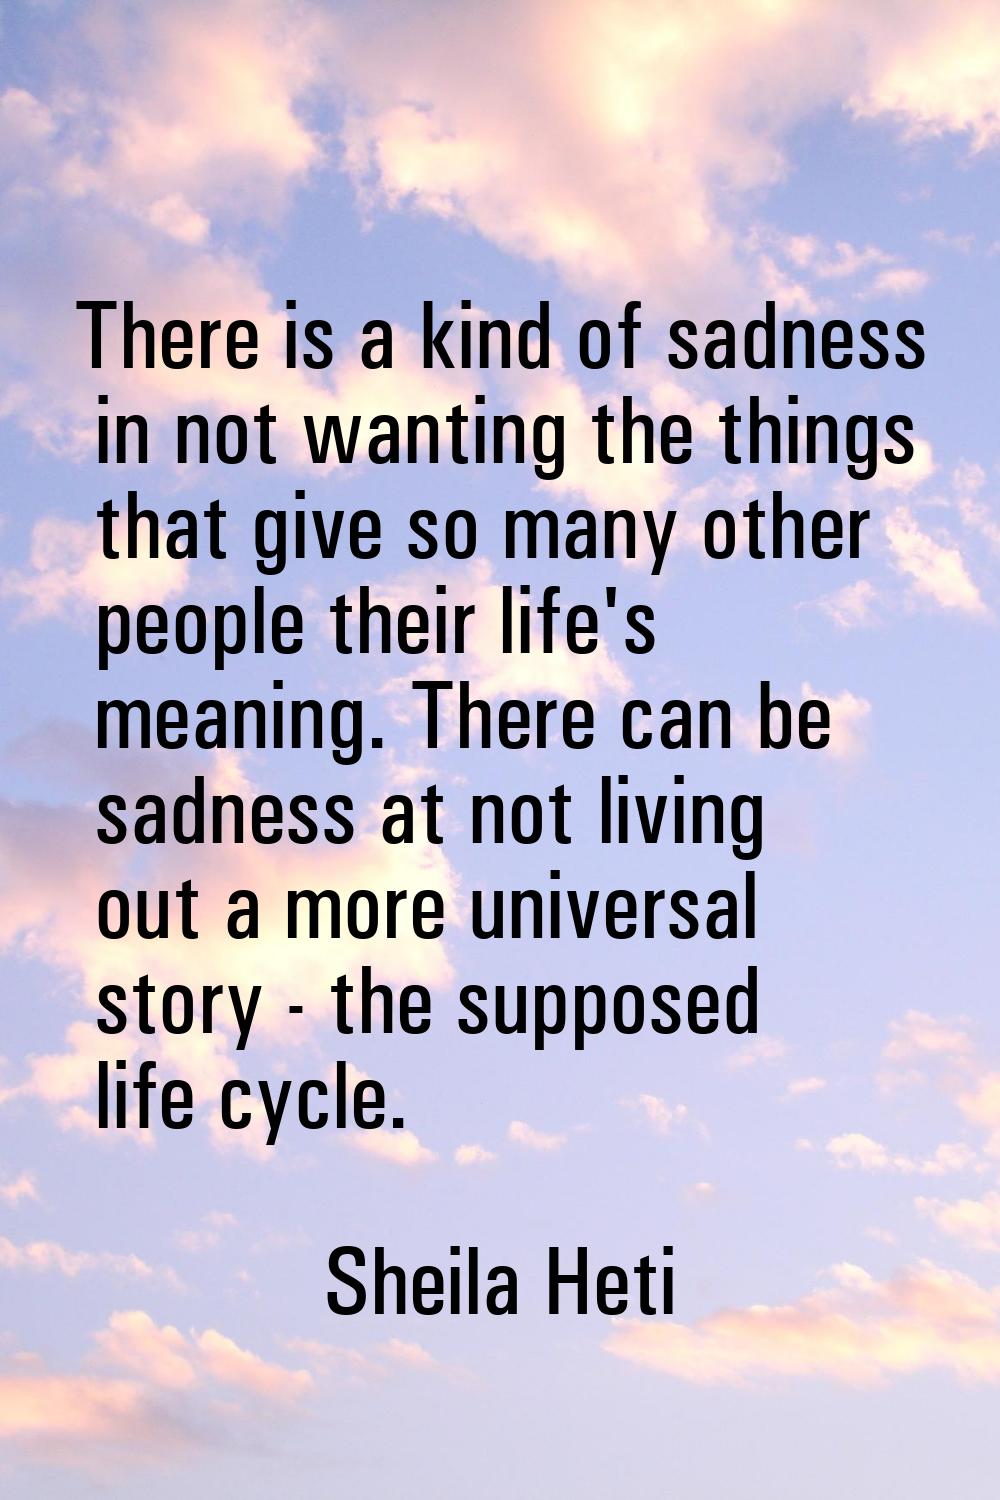 There is a kind of sadness in not wanting the things that give so many other people their life's me